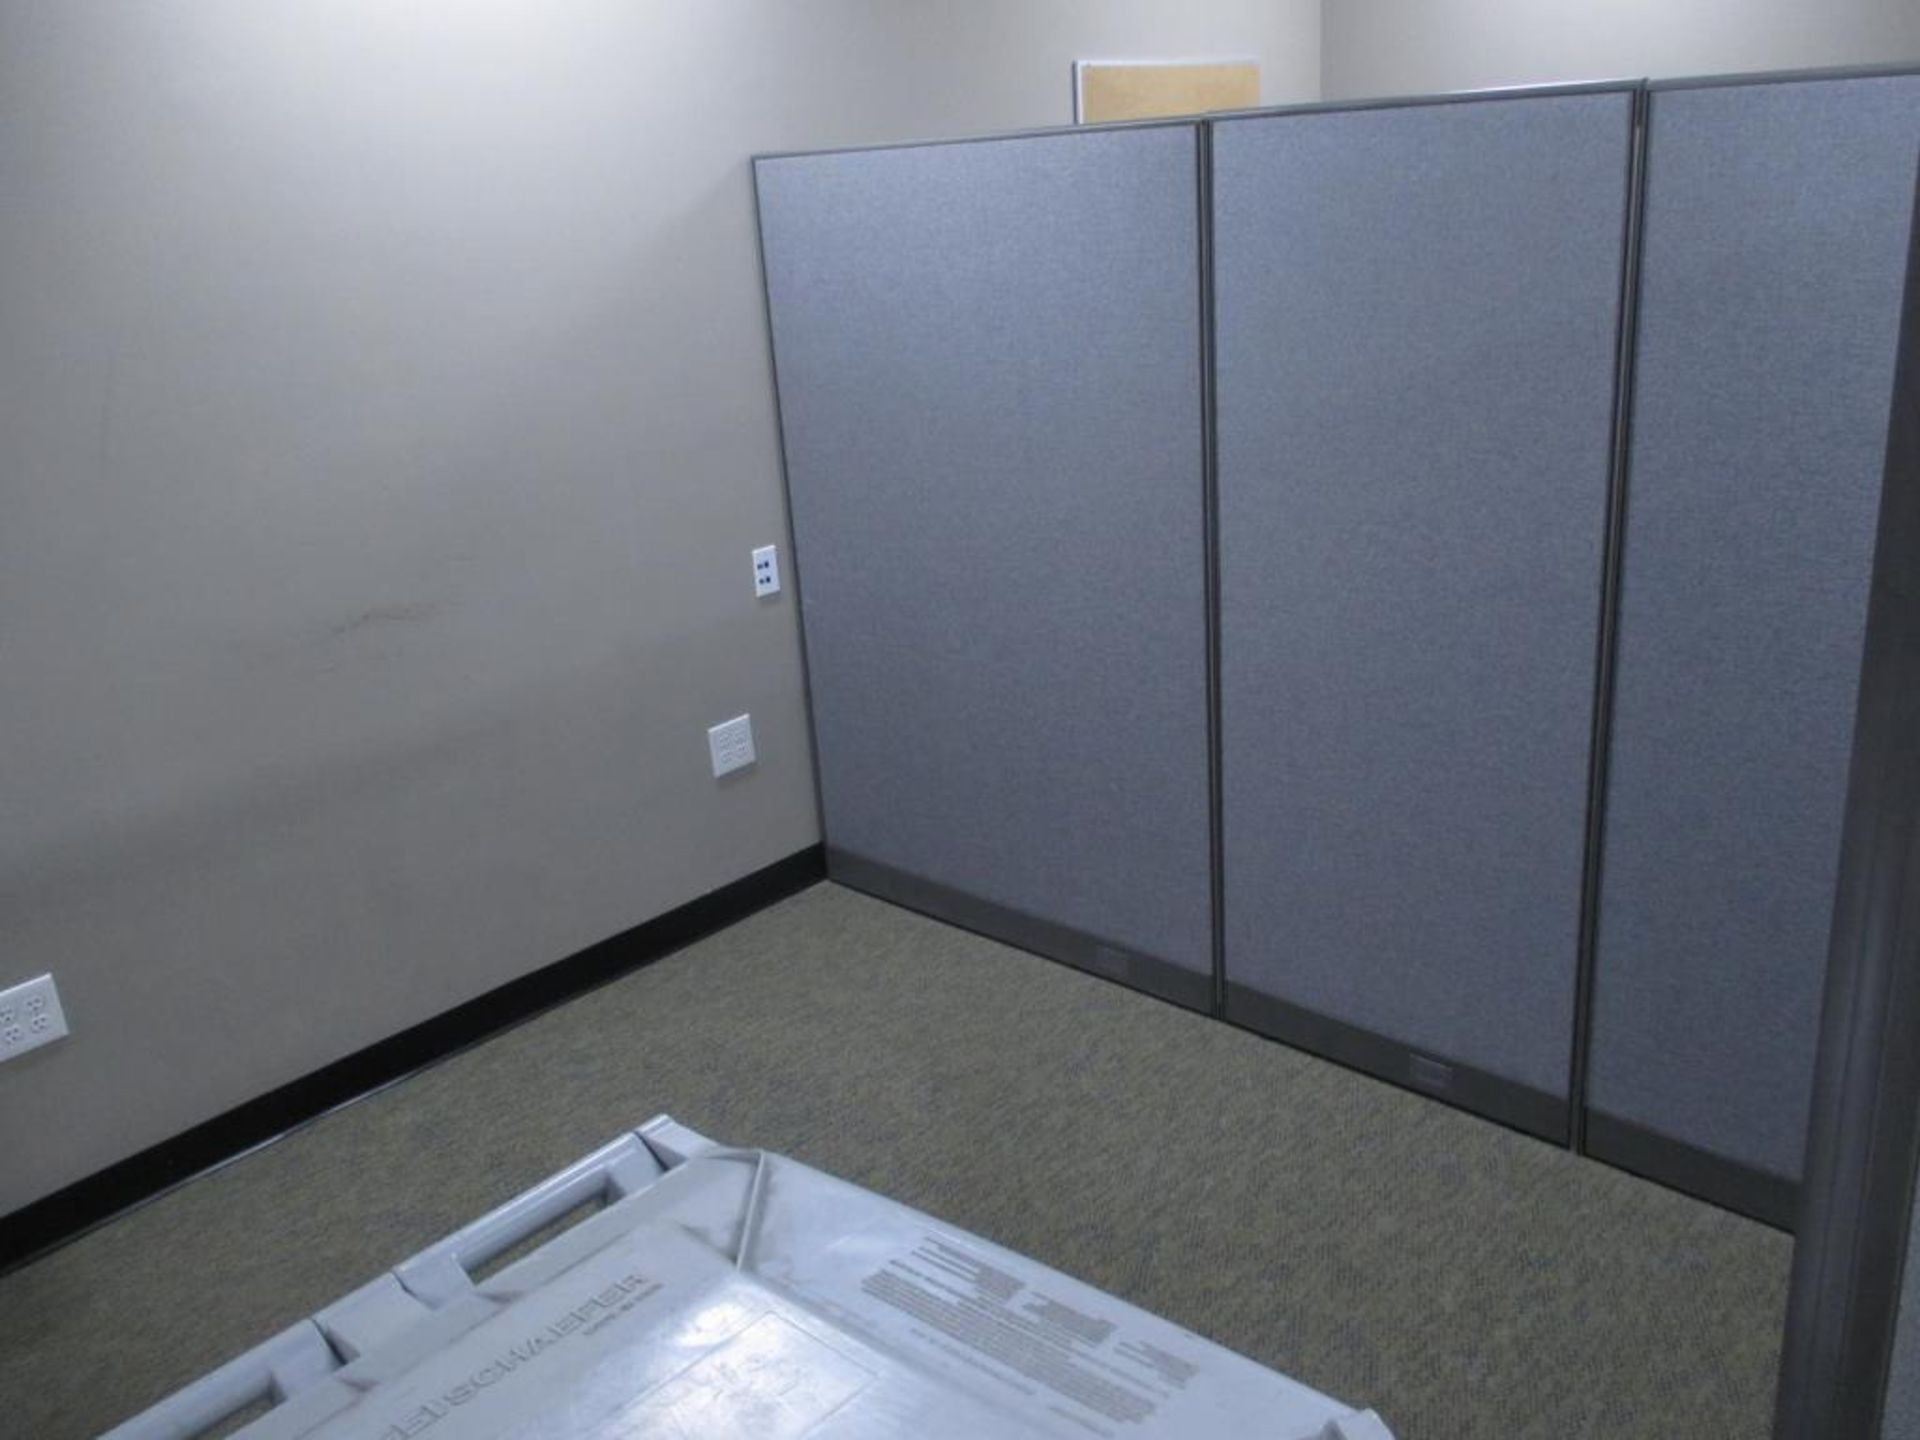 Office Partitions - Image 7 of 11